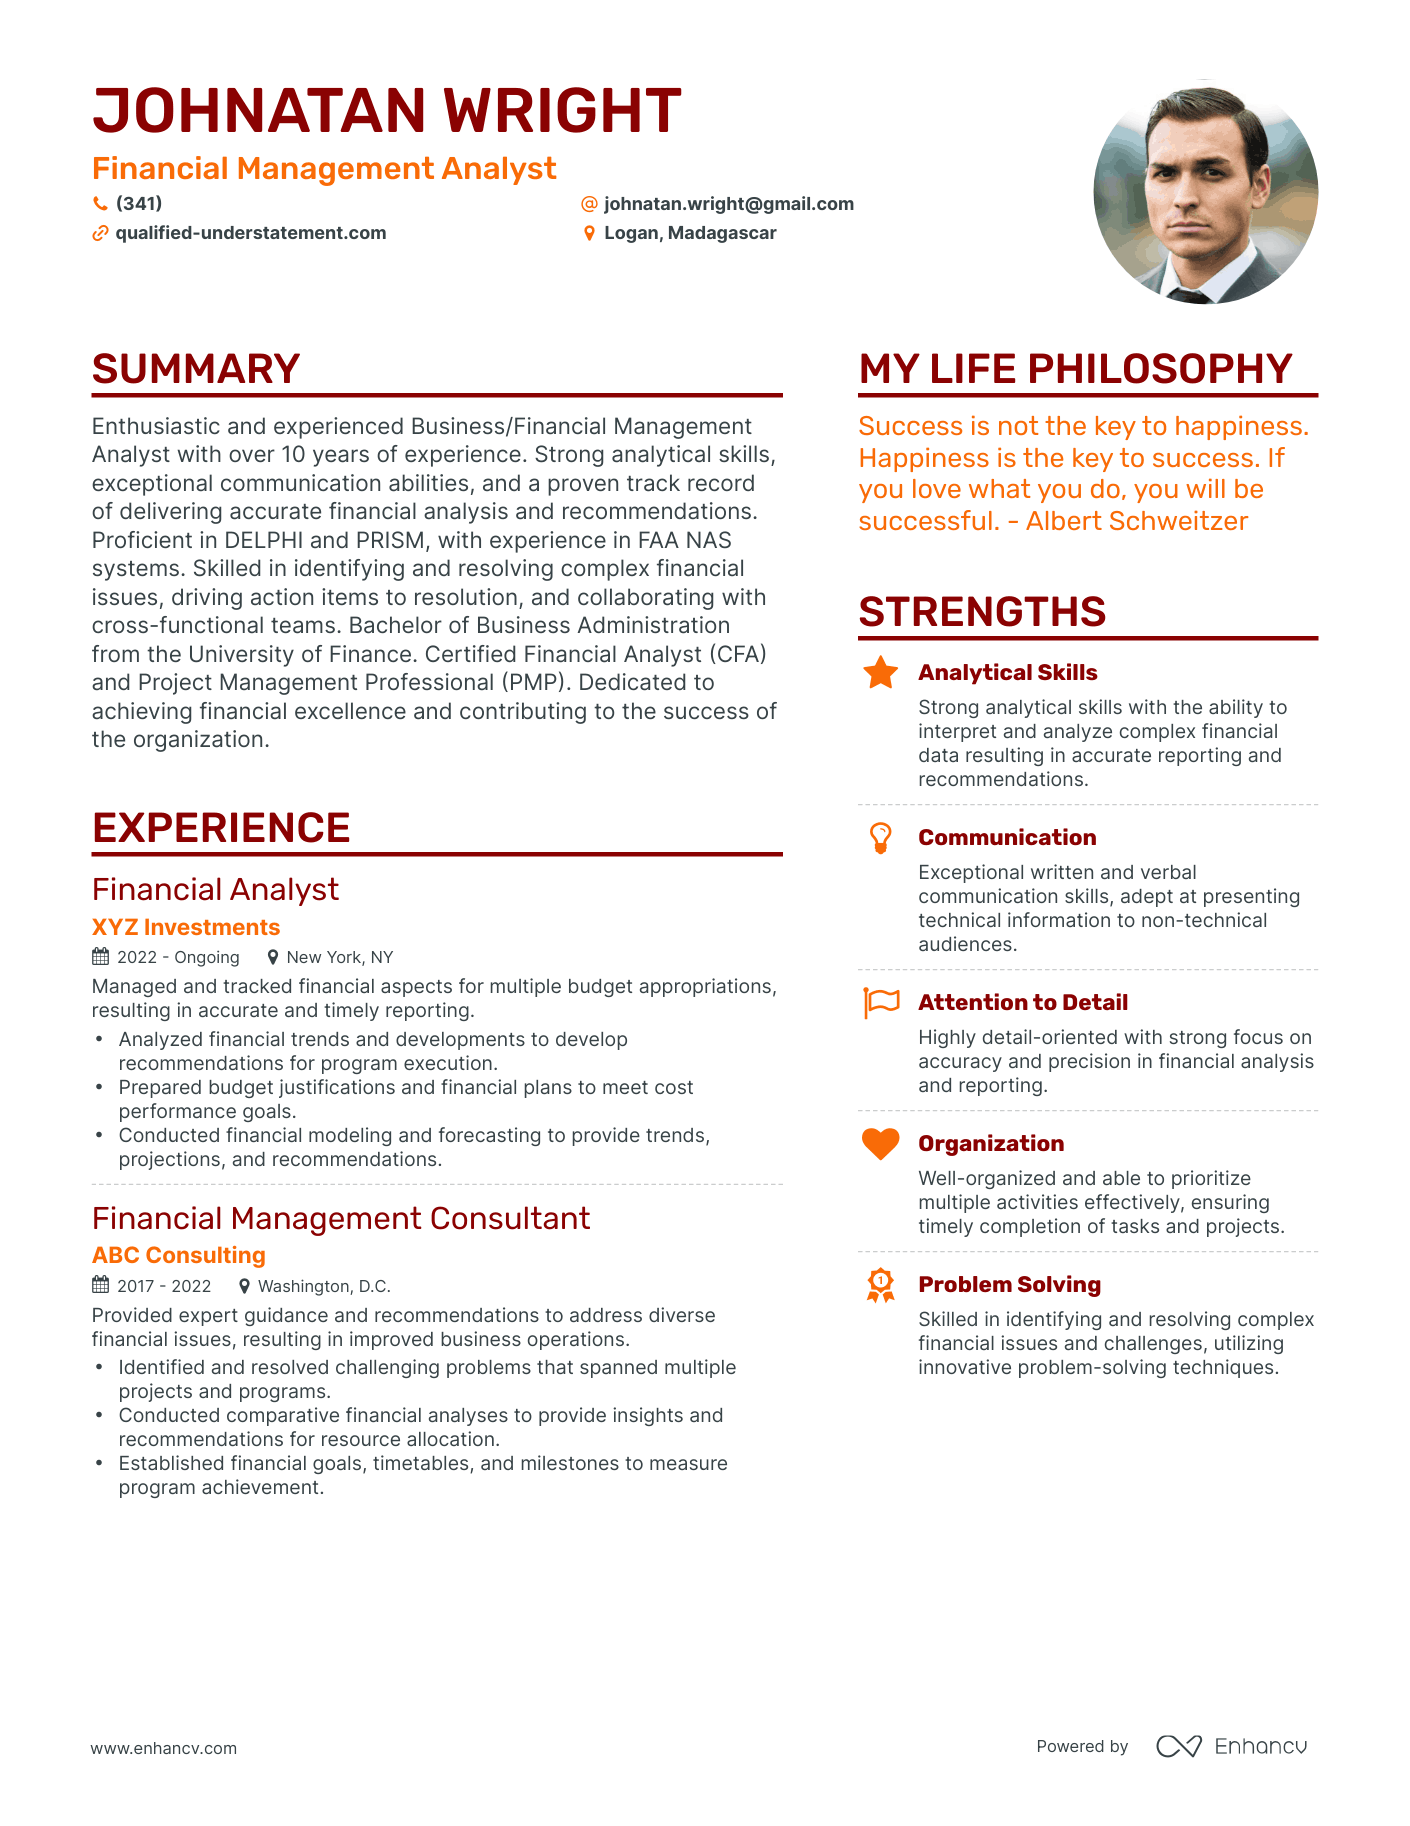 Financial Management Analyst resume example